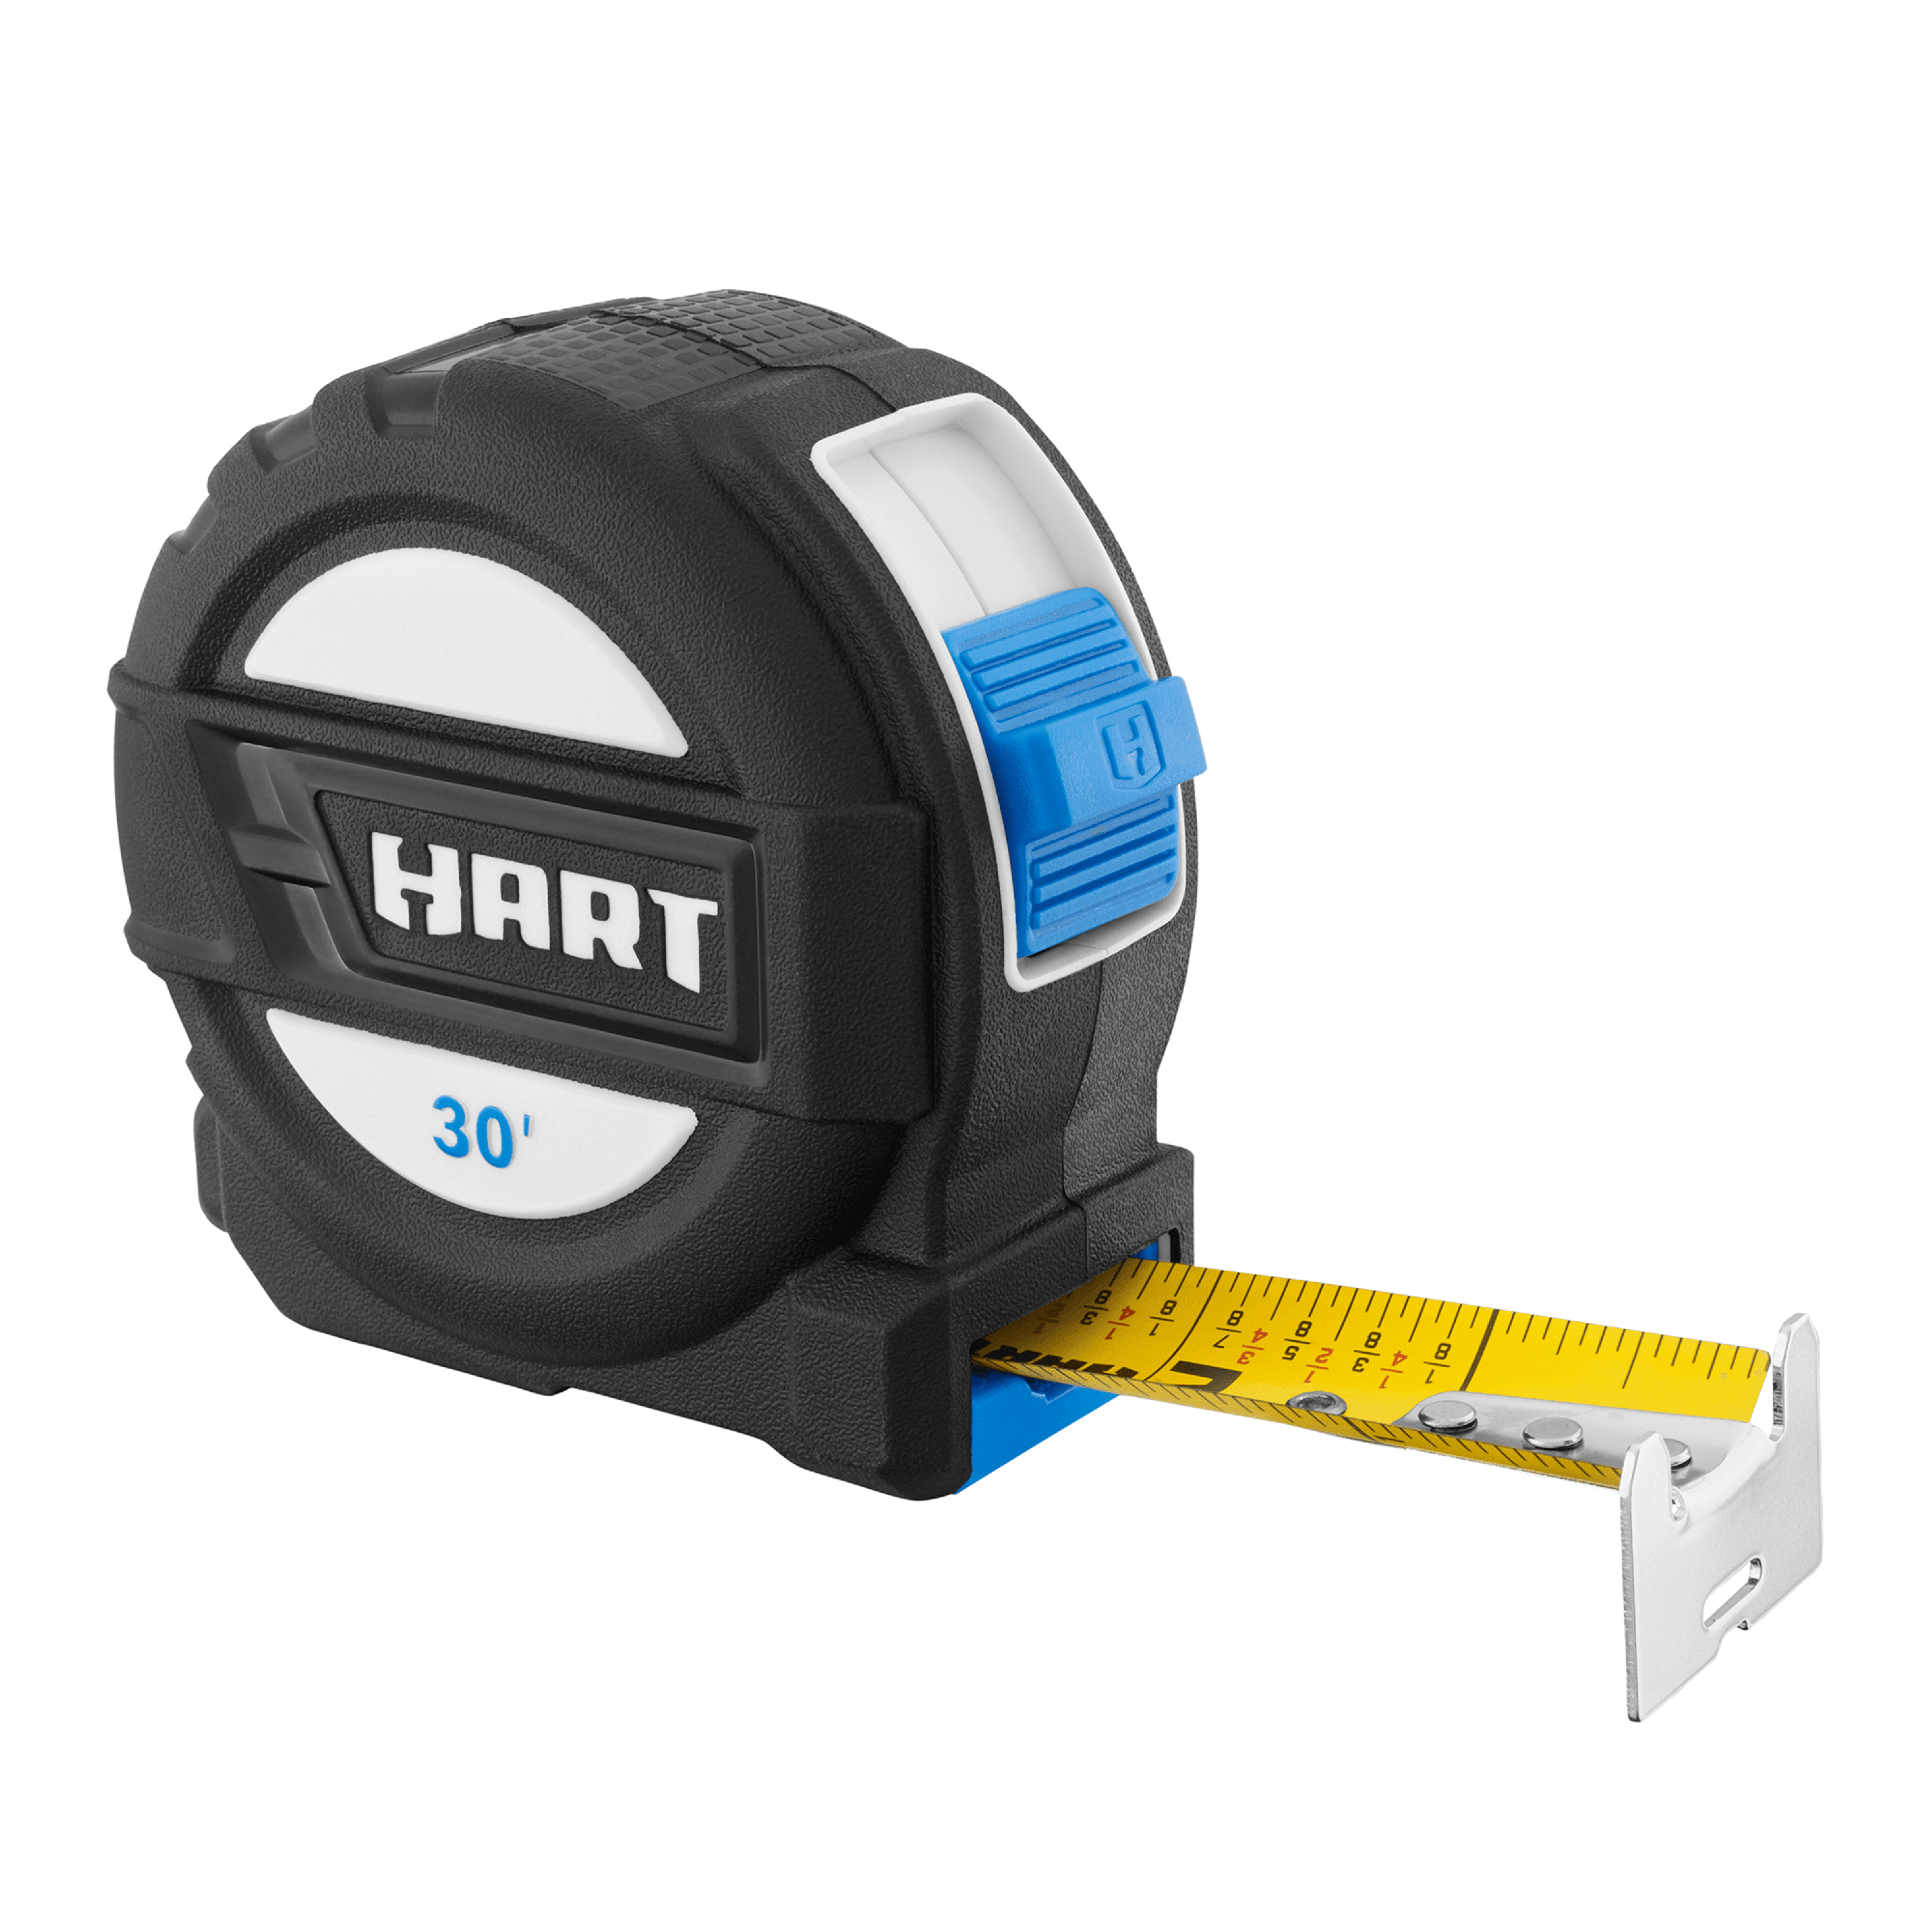 American Expedition 25 FOOT TAPE MEASURE ELK NEW AND FREE SHIPPING 